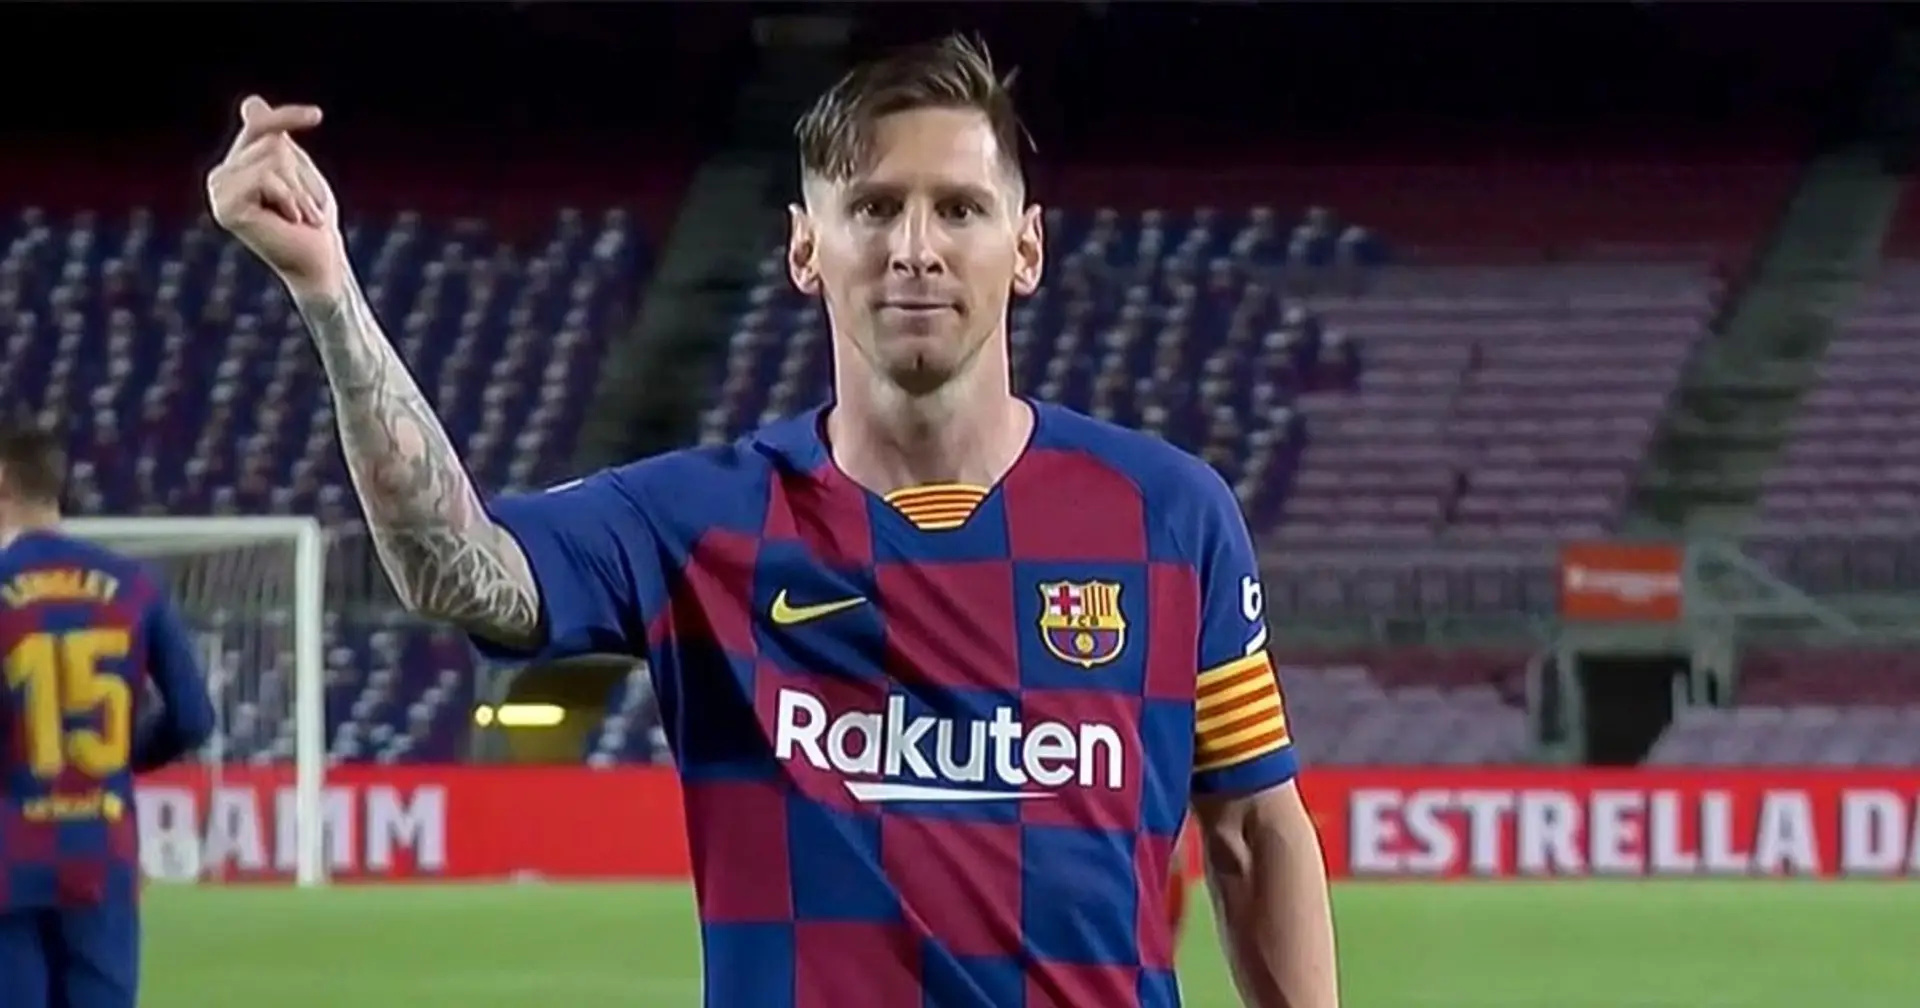 Leo Messi shows best stats in 8 attacking categories in 2019/20 La Liga